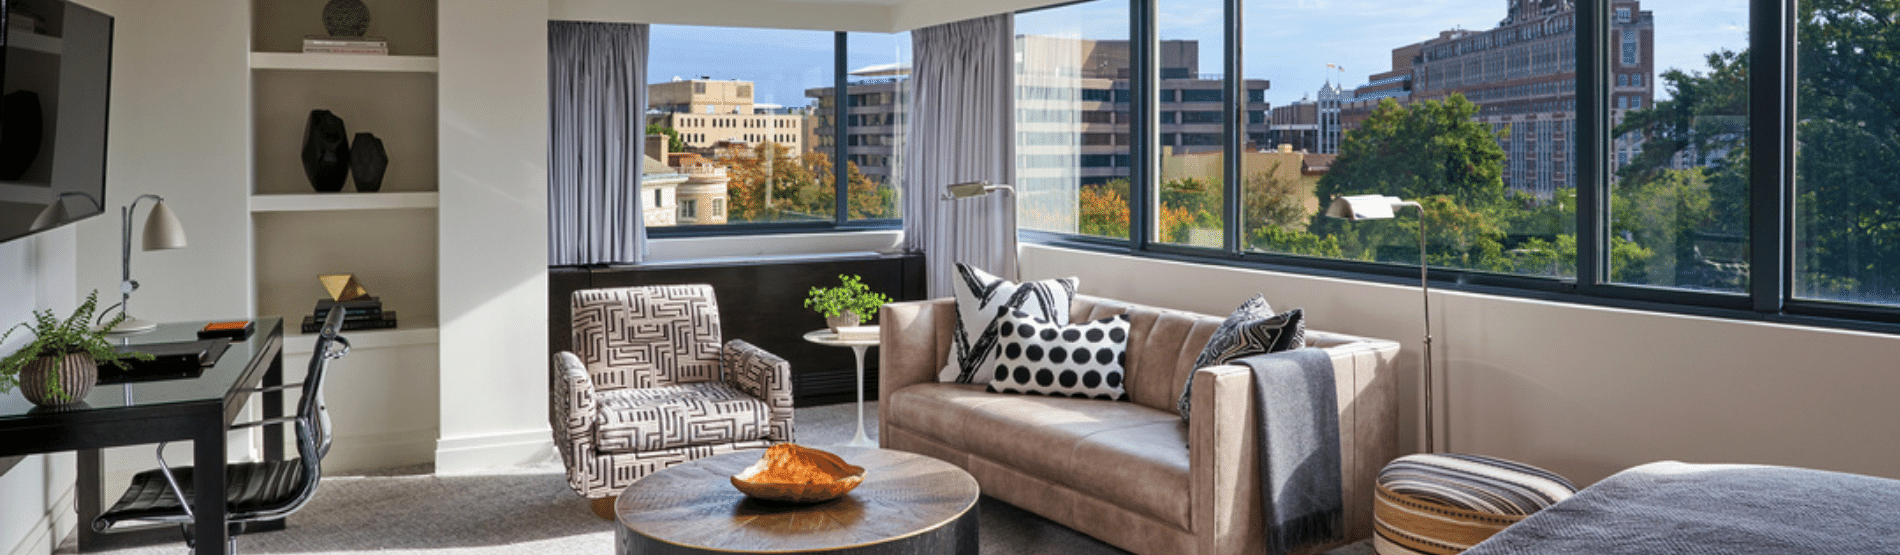 Junior Suite with large windows overlooking the city